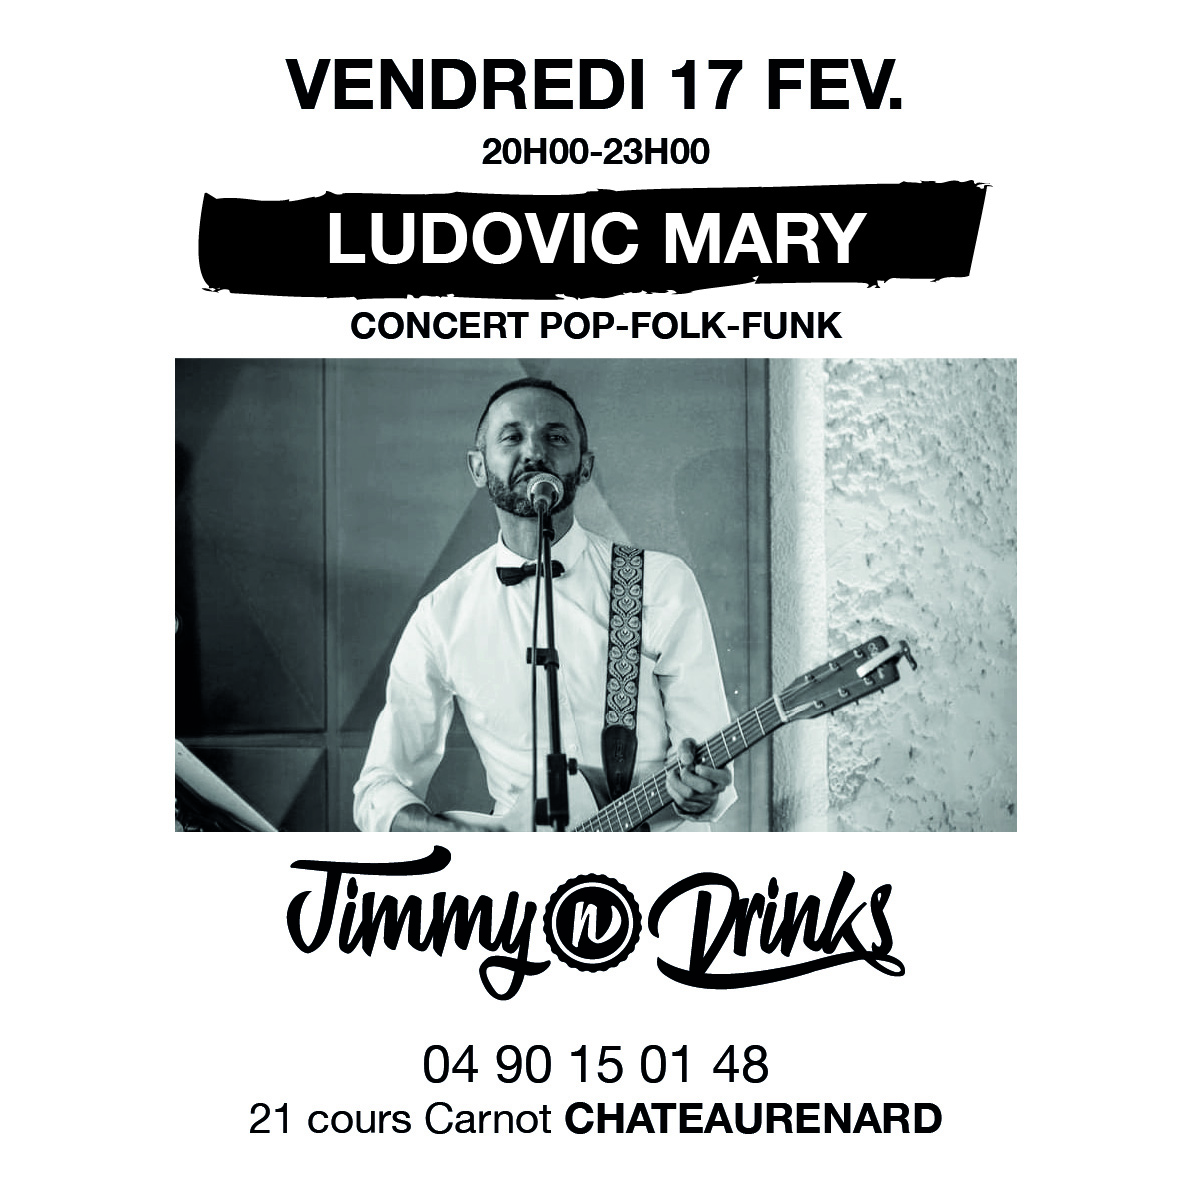 Ludovic Mary en concert